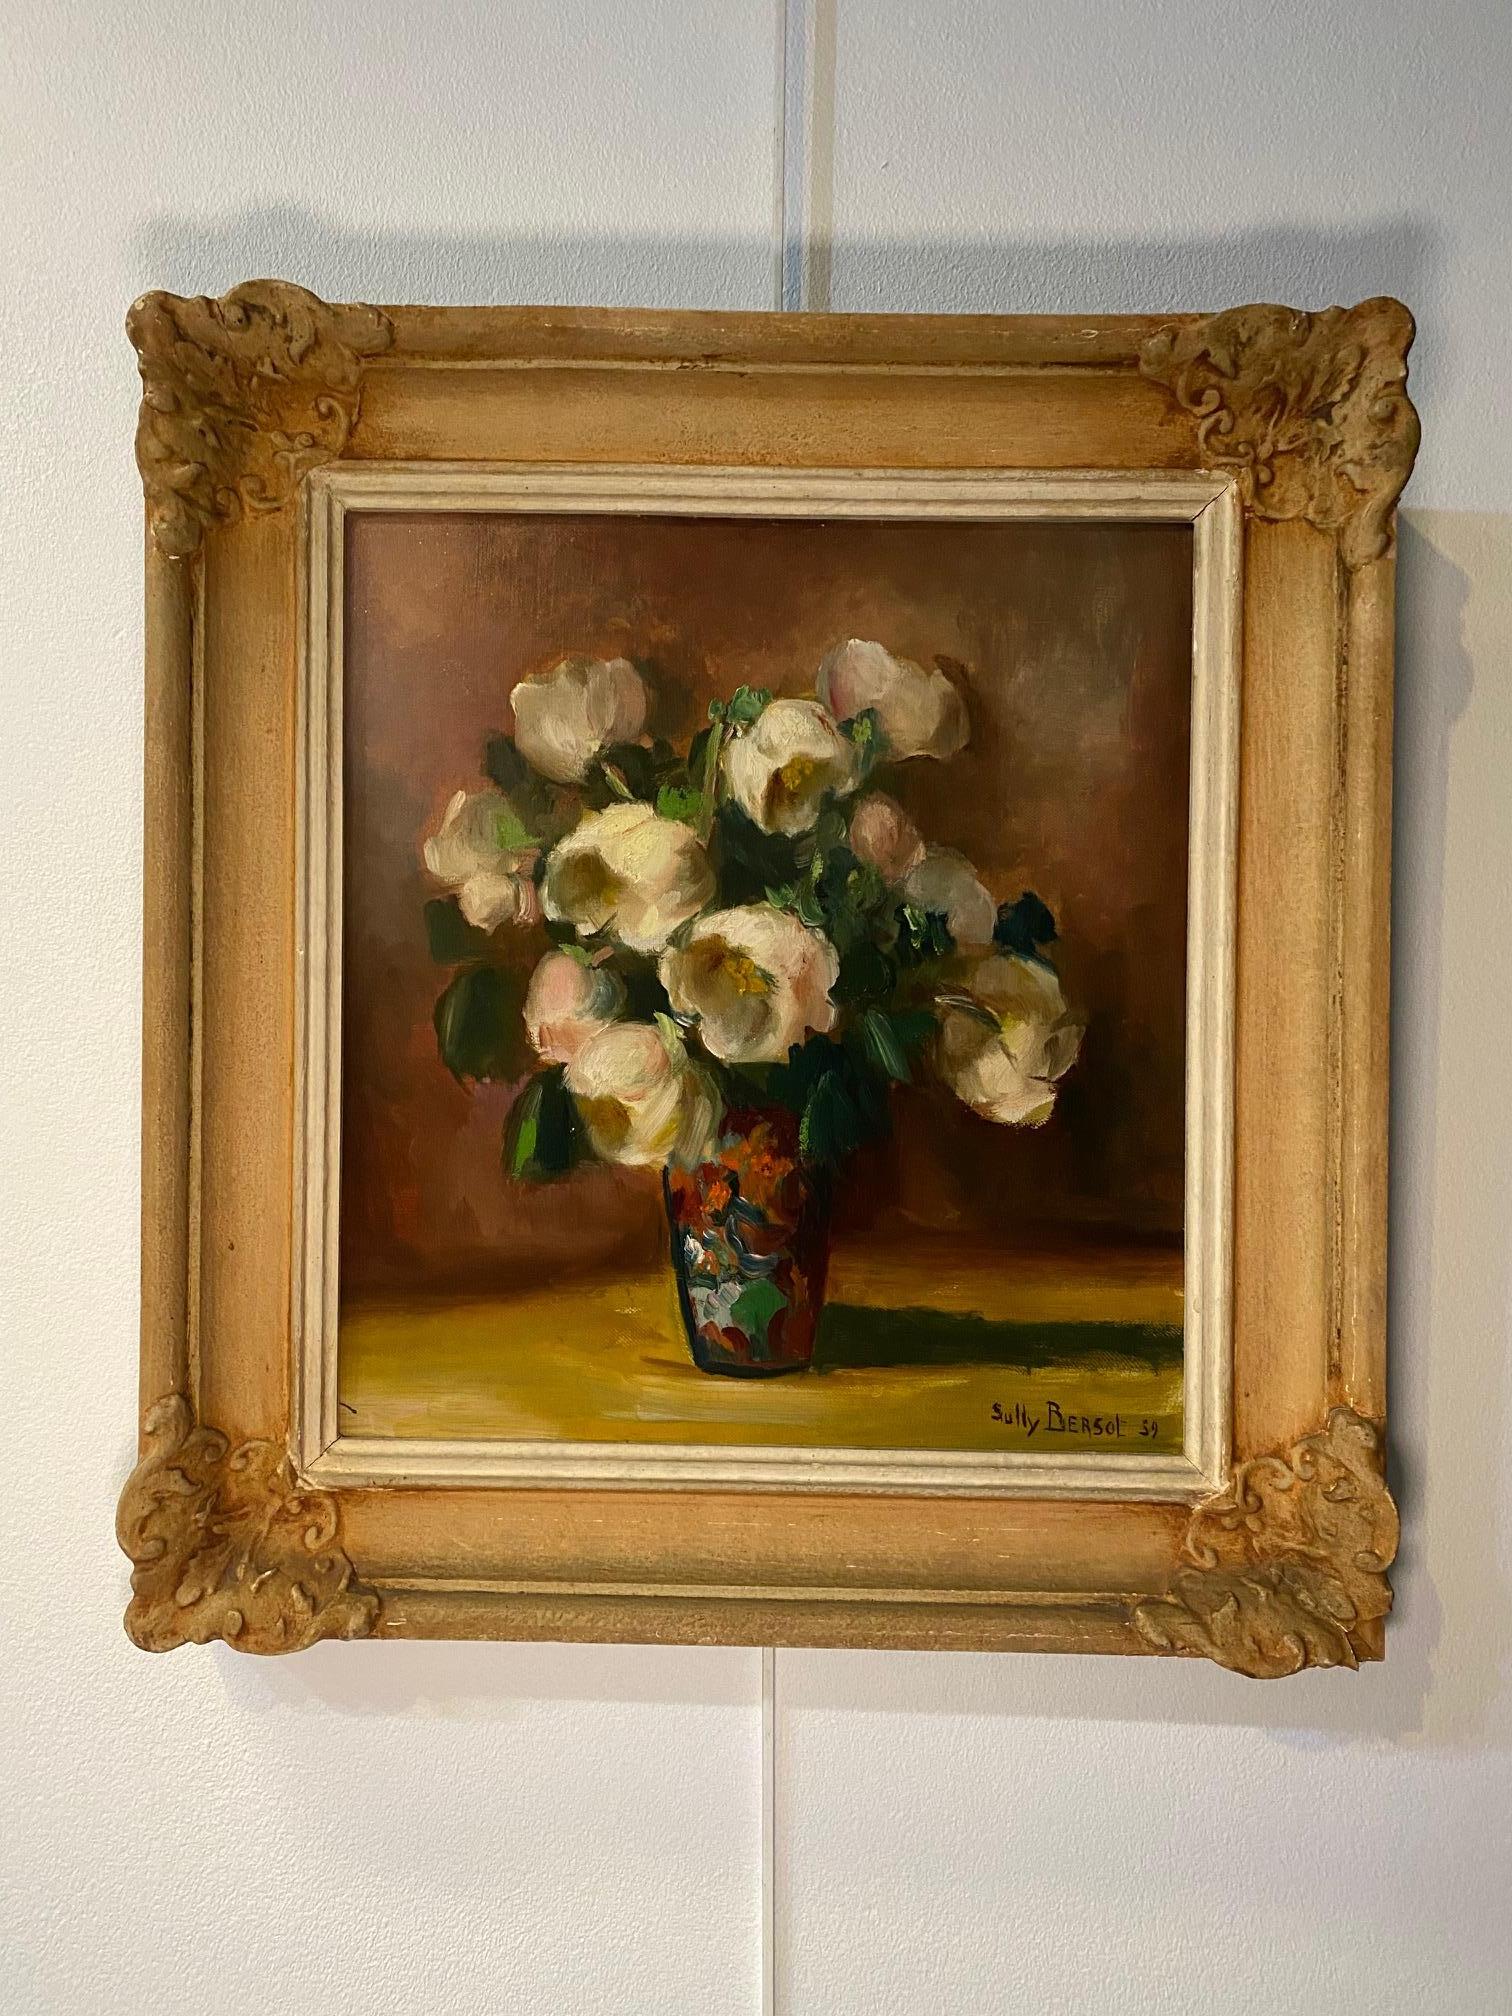 White Roses bouquet by Sully Bersot - Oil on canvas 32x35 cm For Sale 2